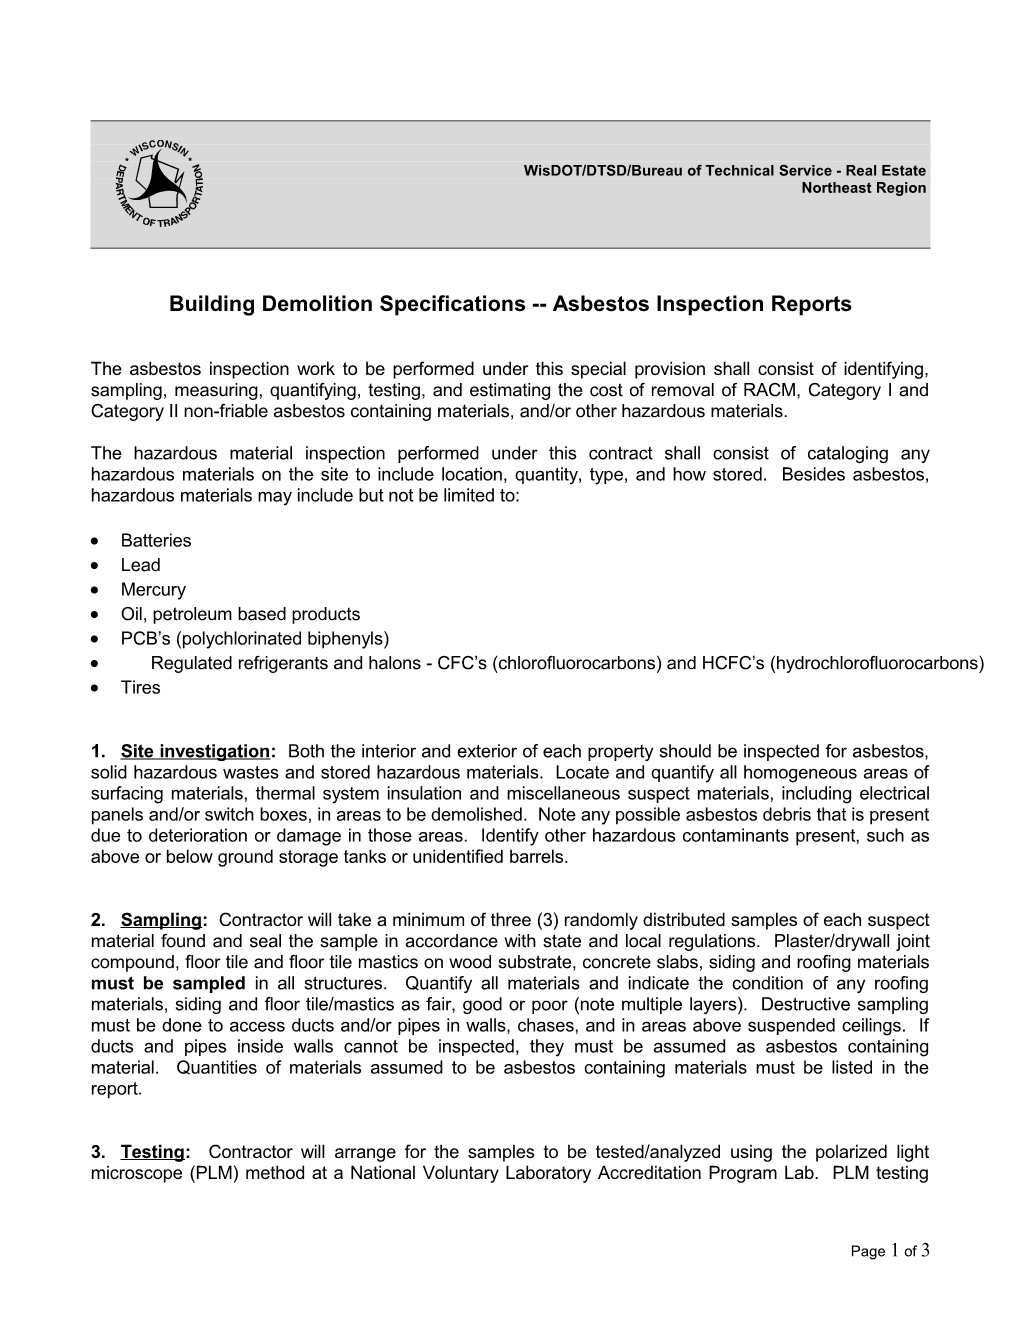 Specifications for Asbestos Inspection Reports